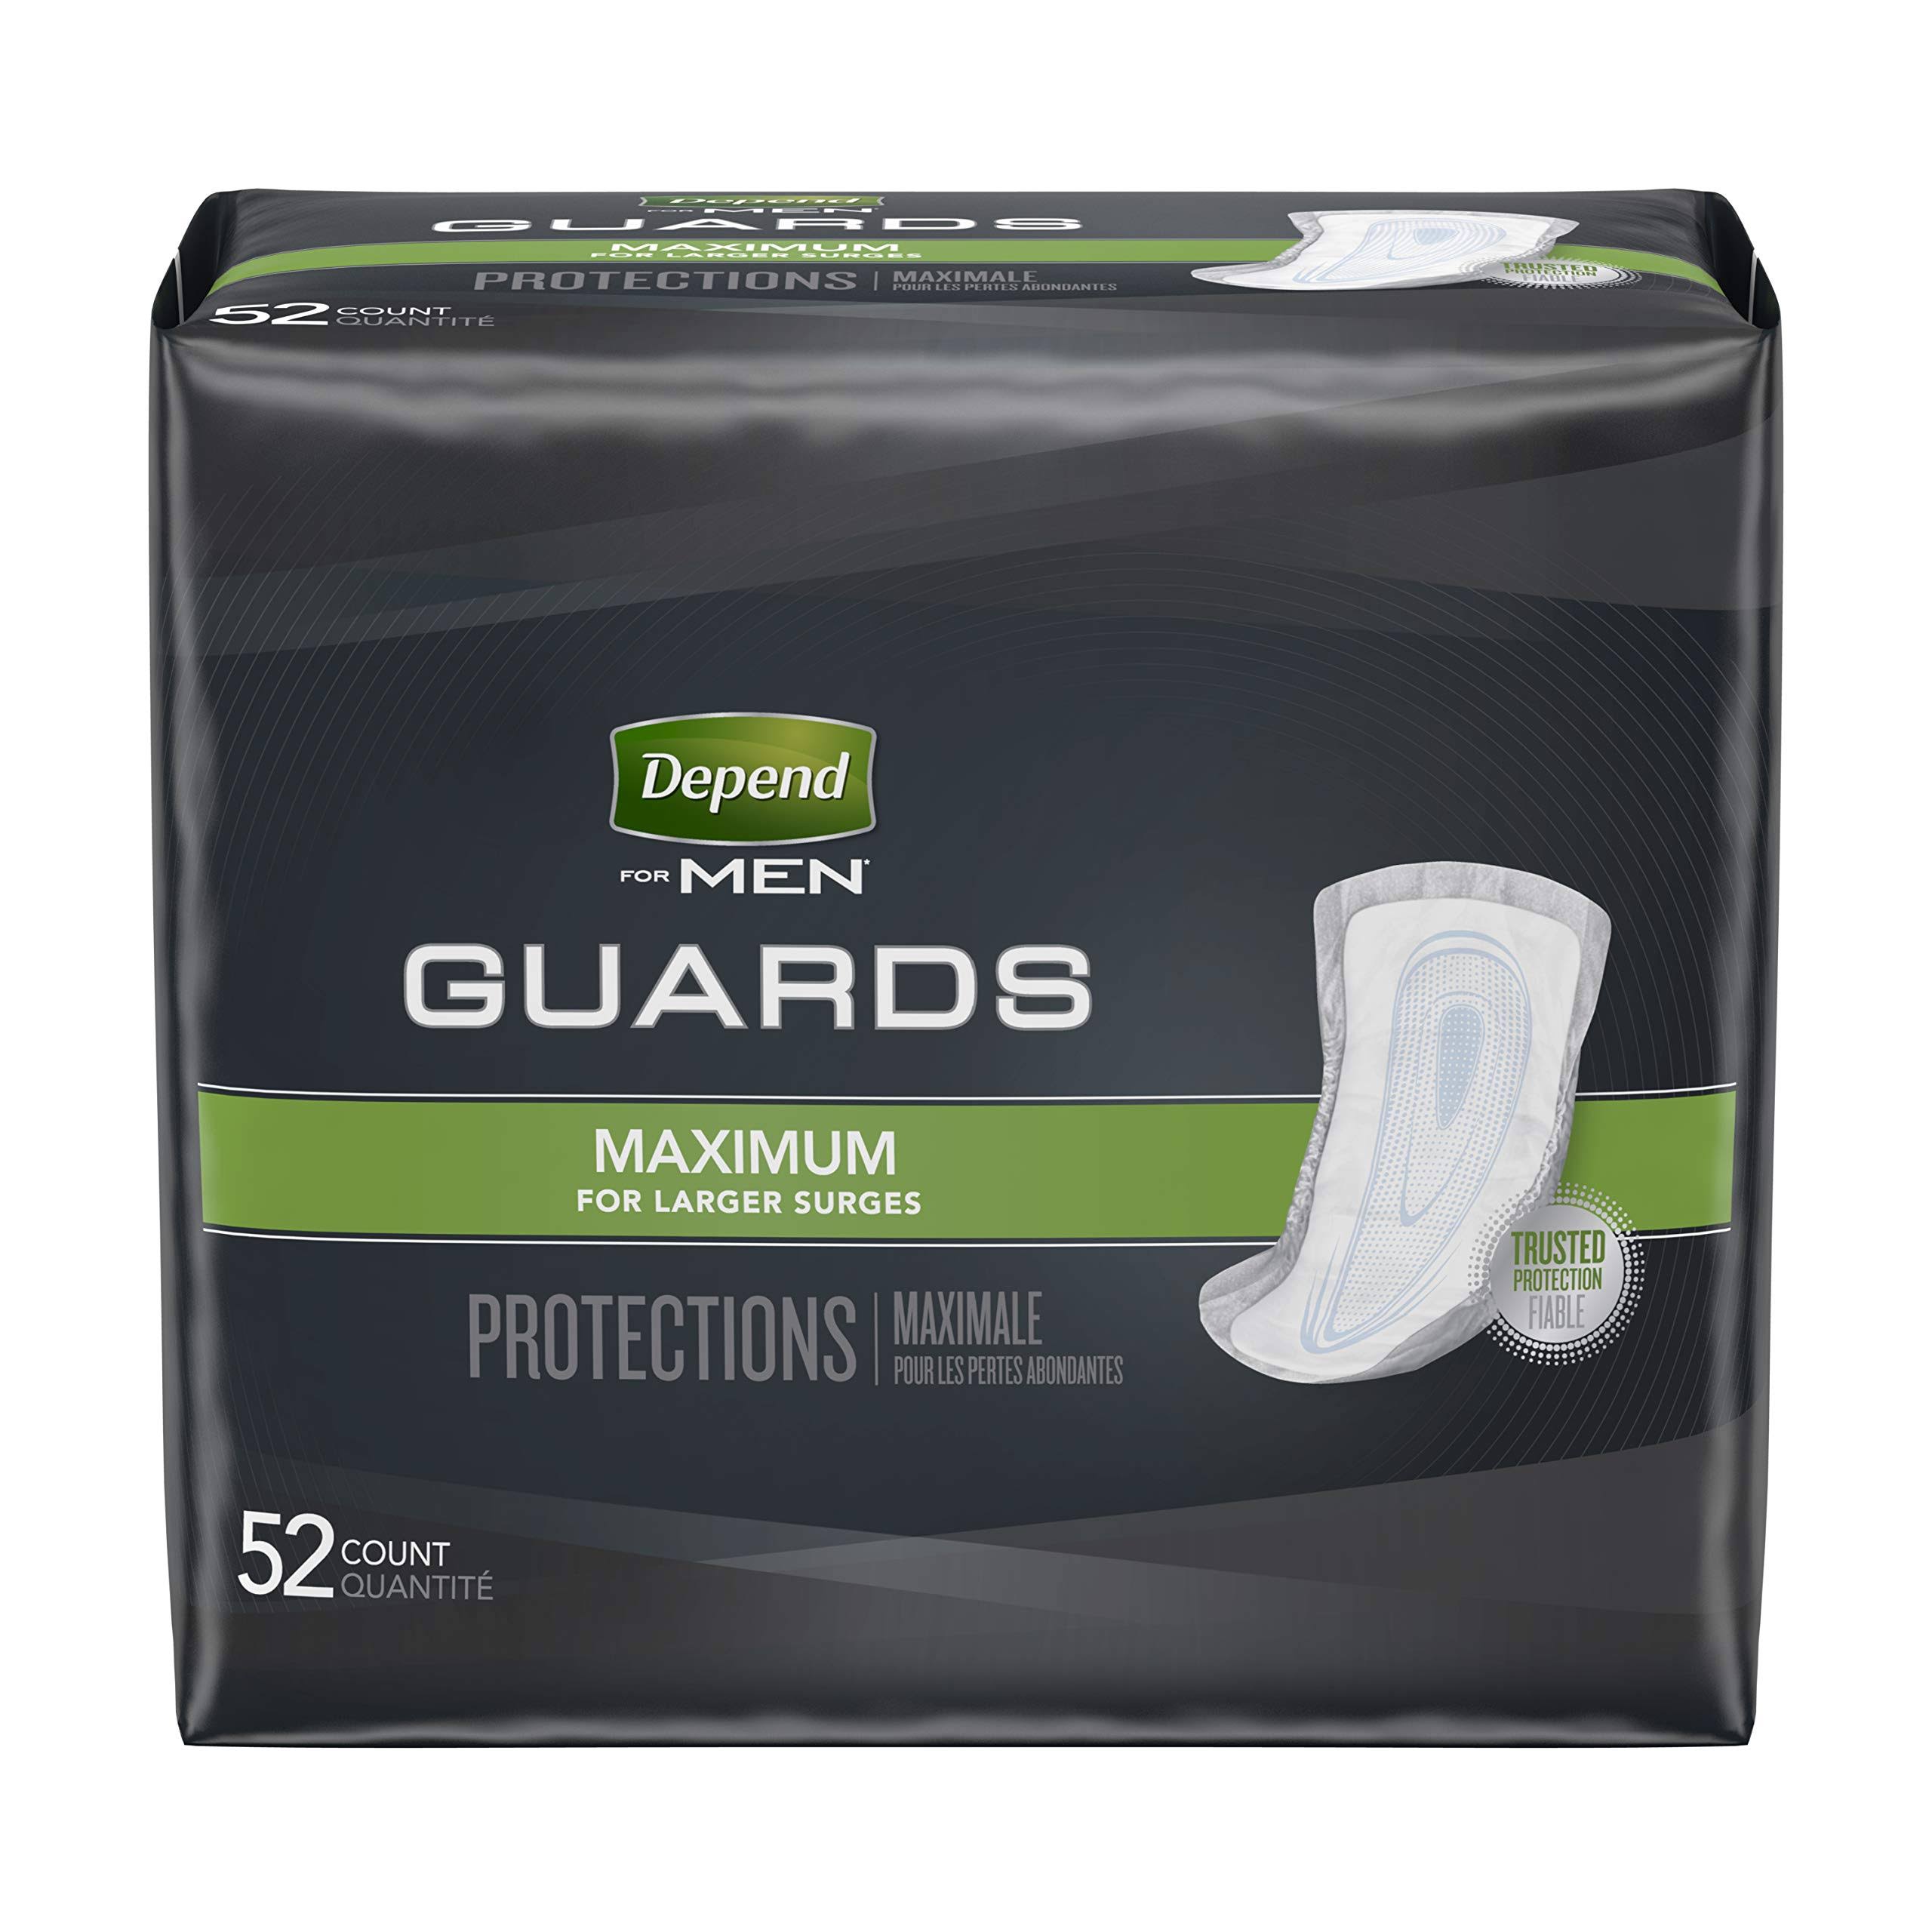 Depend for Men Maximum Absorbency Guards - 52ct